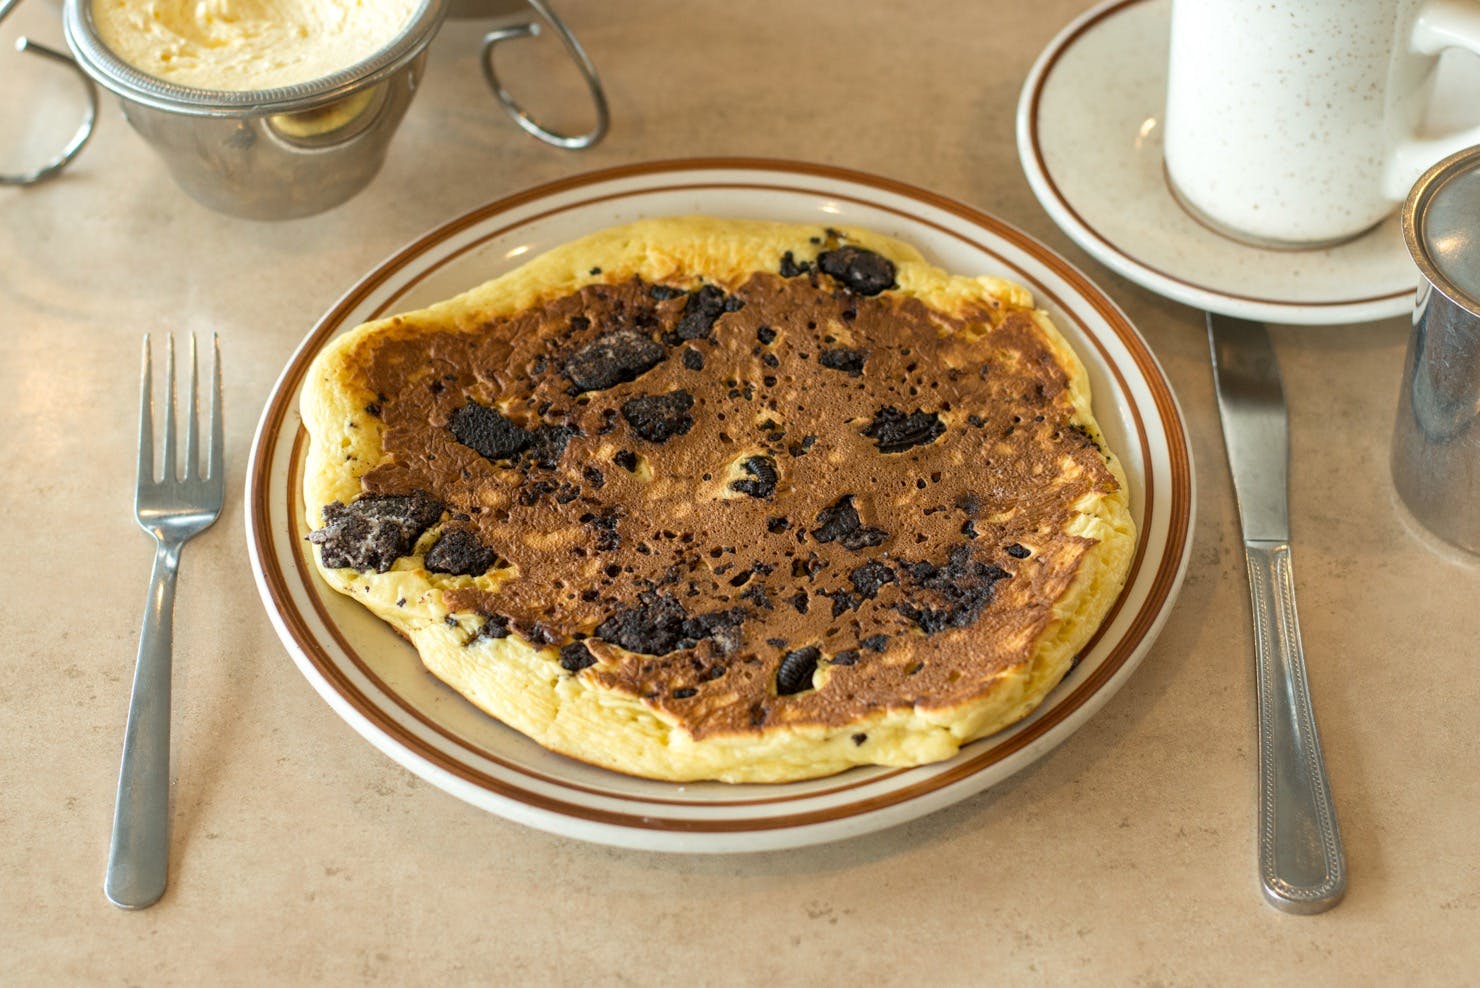 Oreo Pancake Breakfast from The Pancake Place in Green Bay, WI